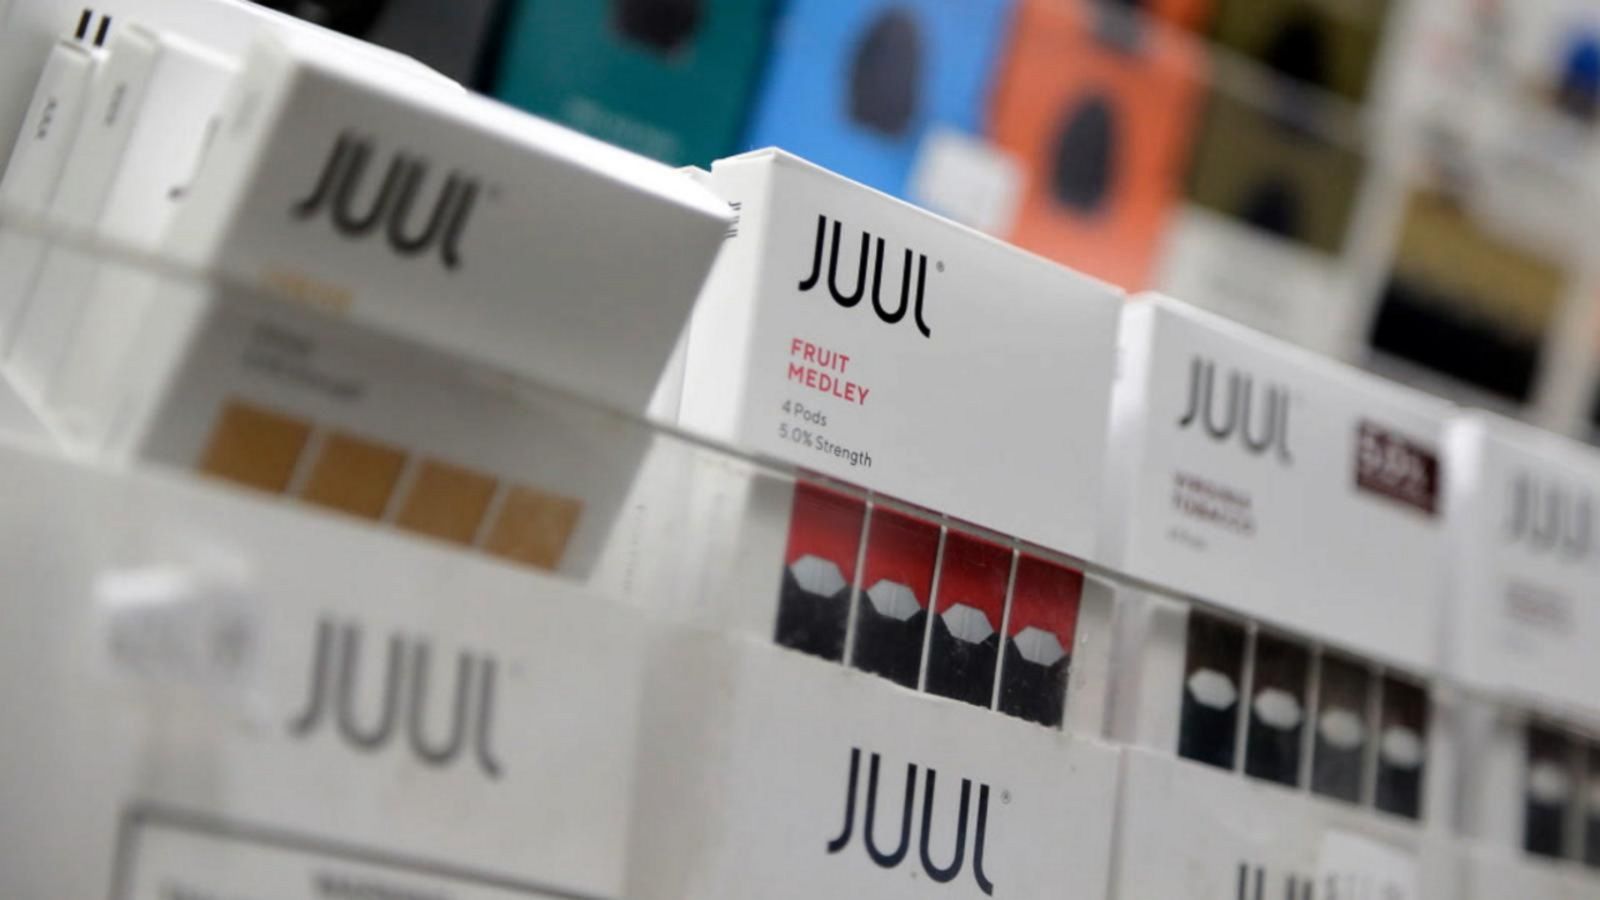 VIDEO: Juul to stop sales of flavored pods